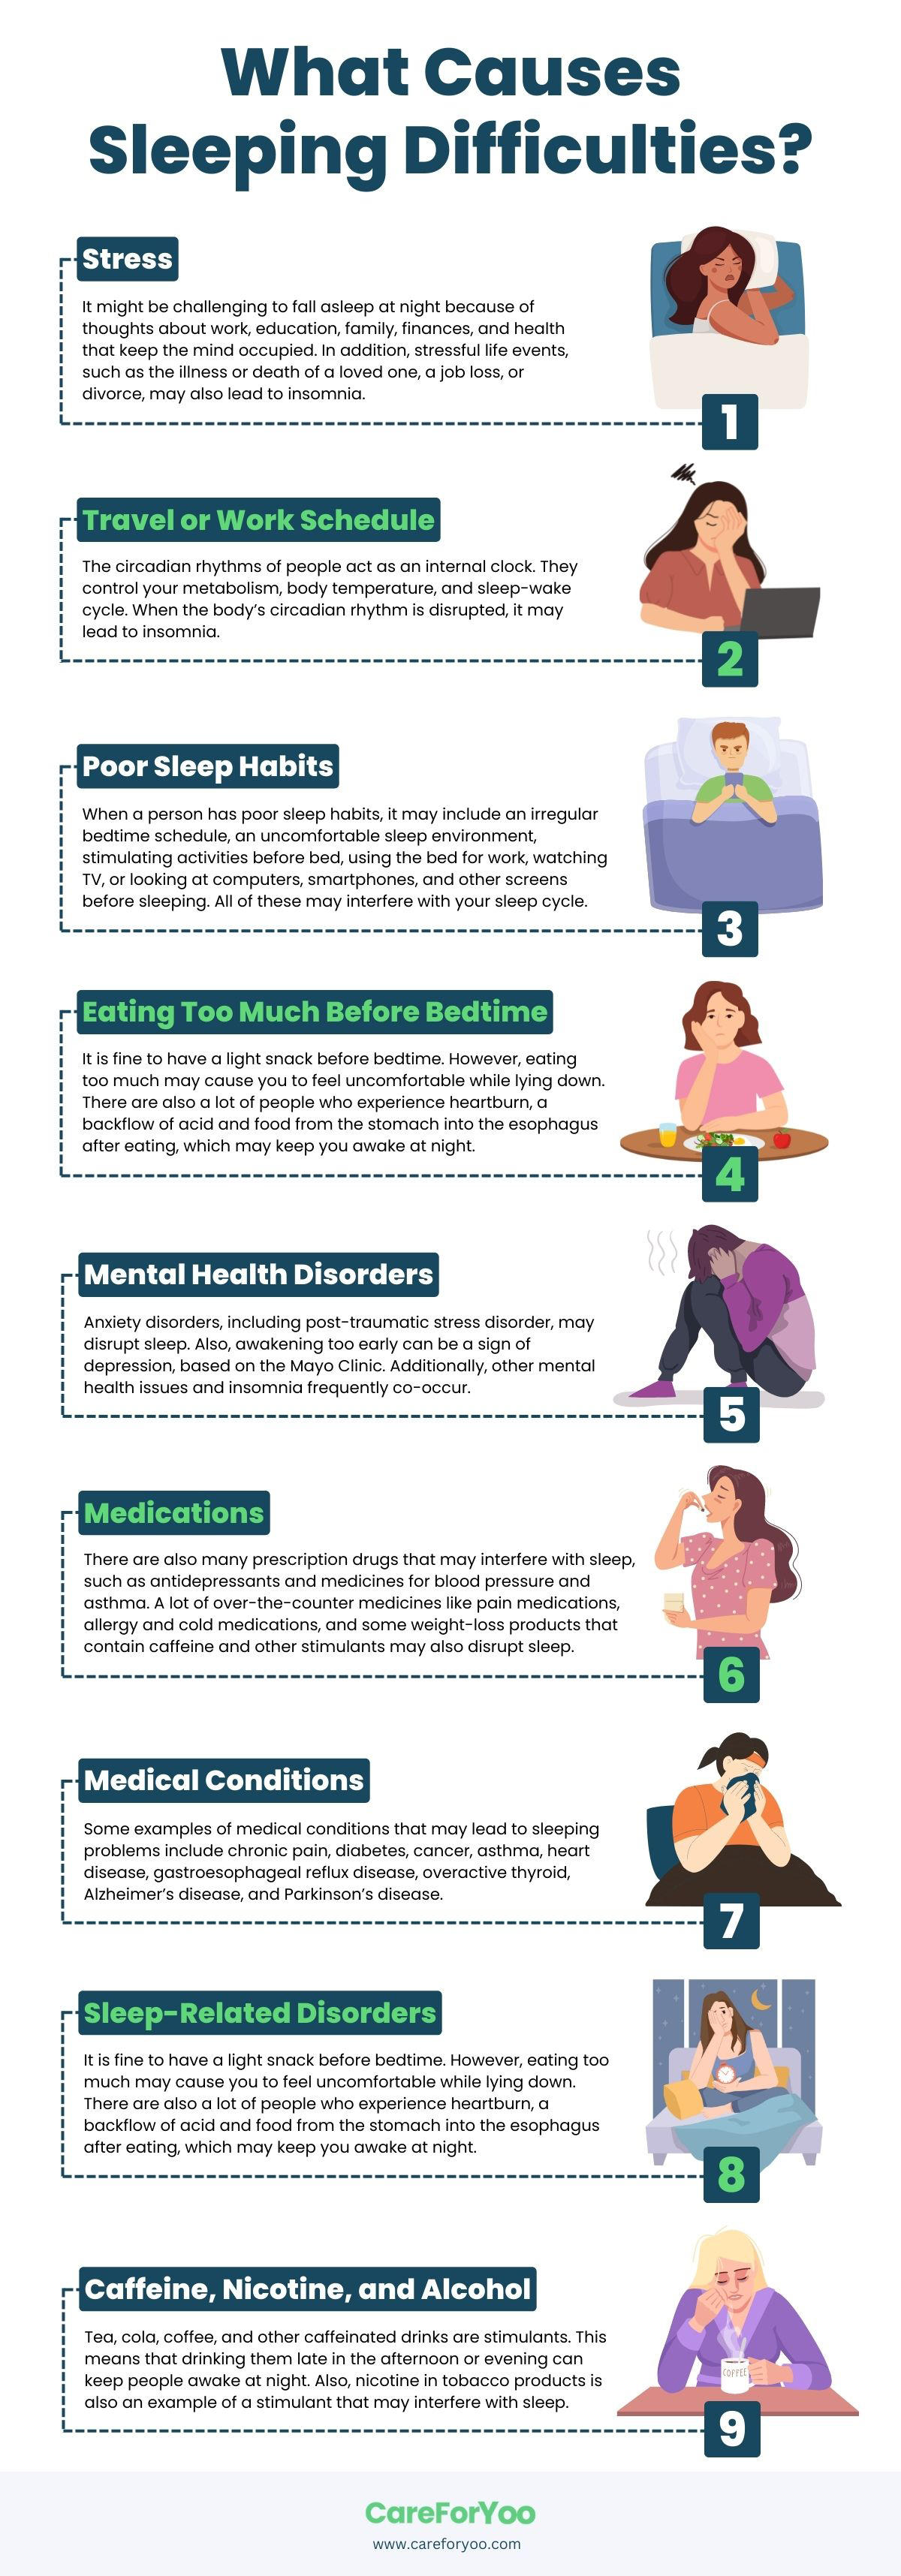 What Causes Sleeping Difficulties